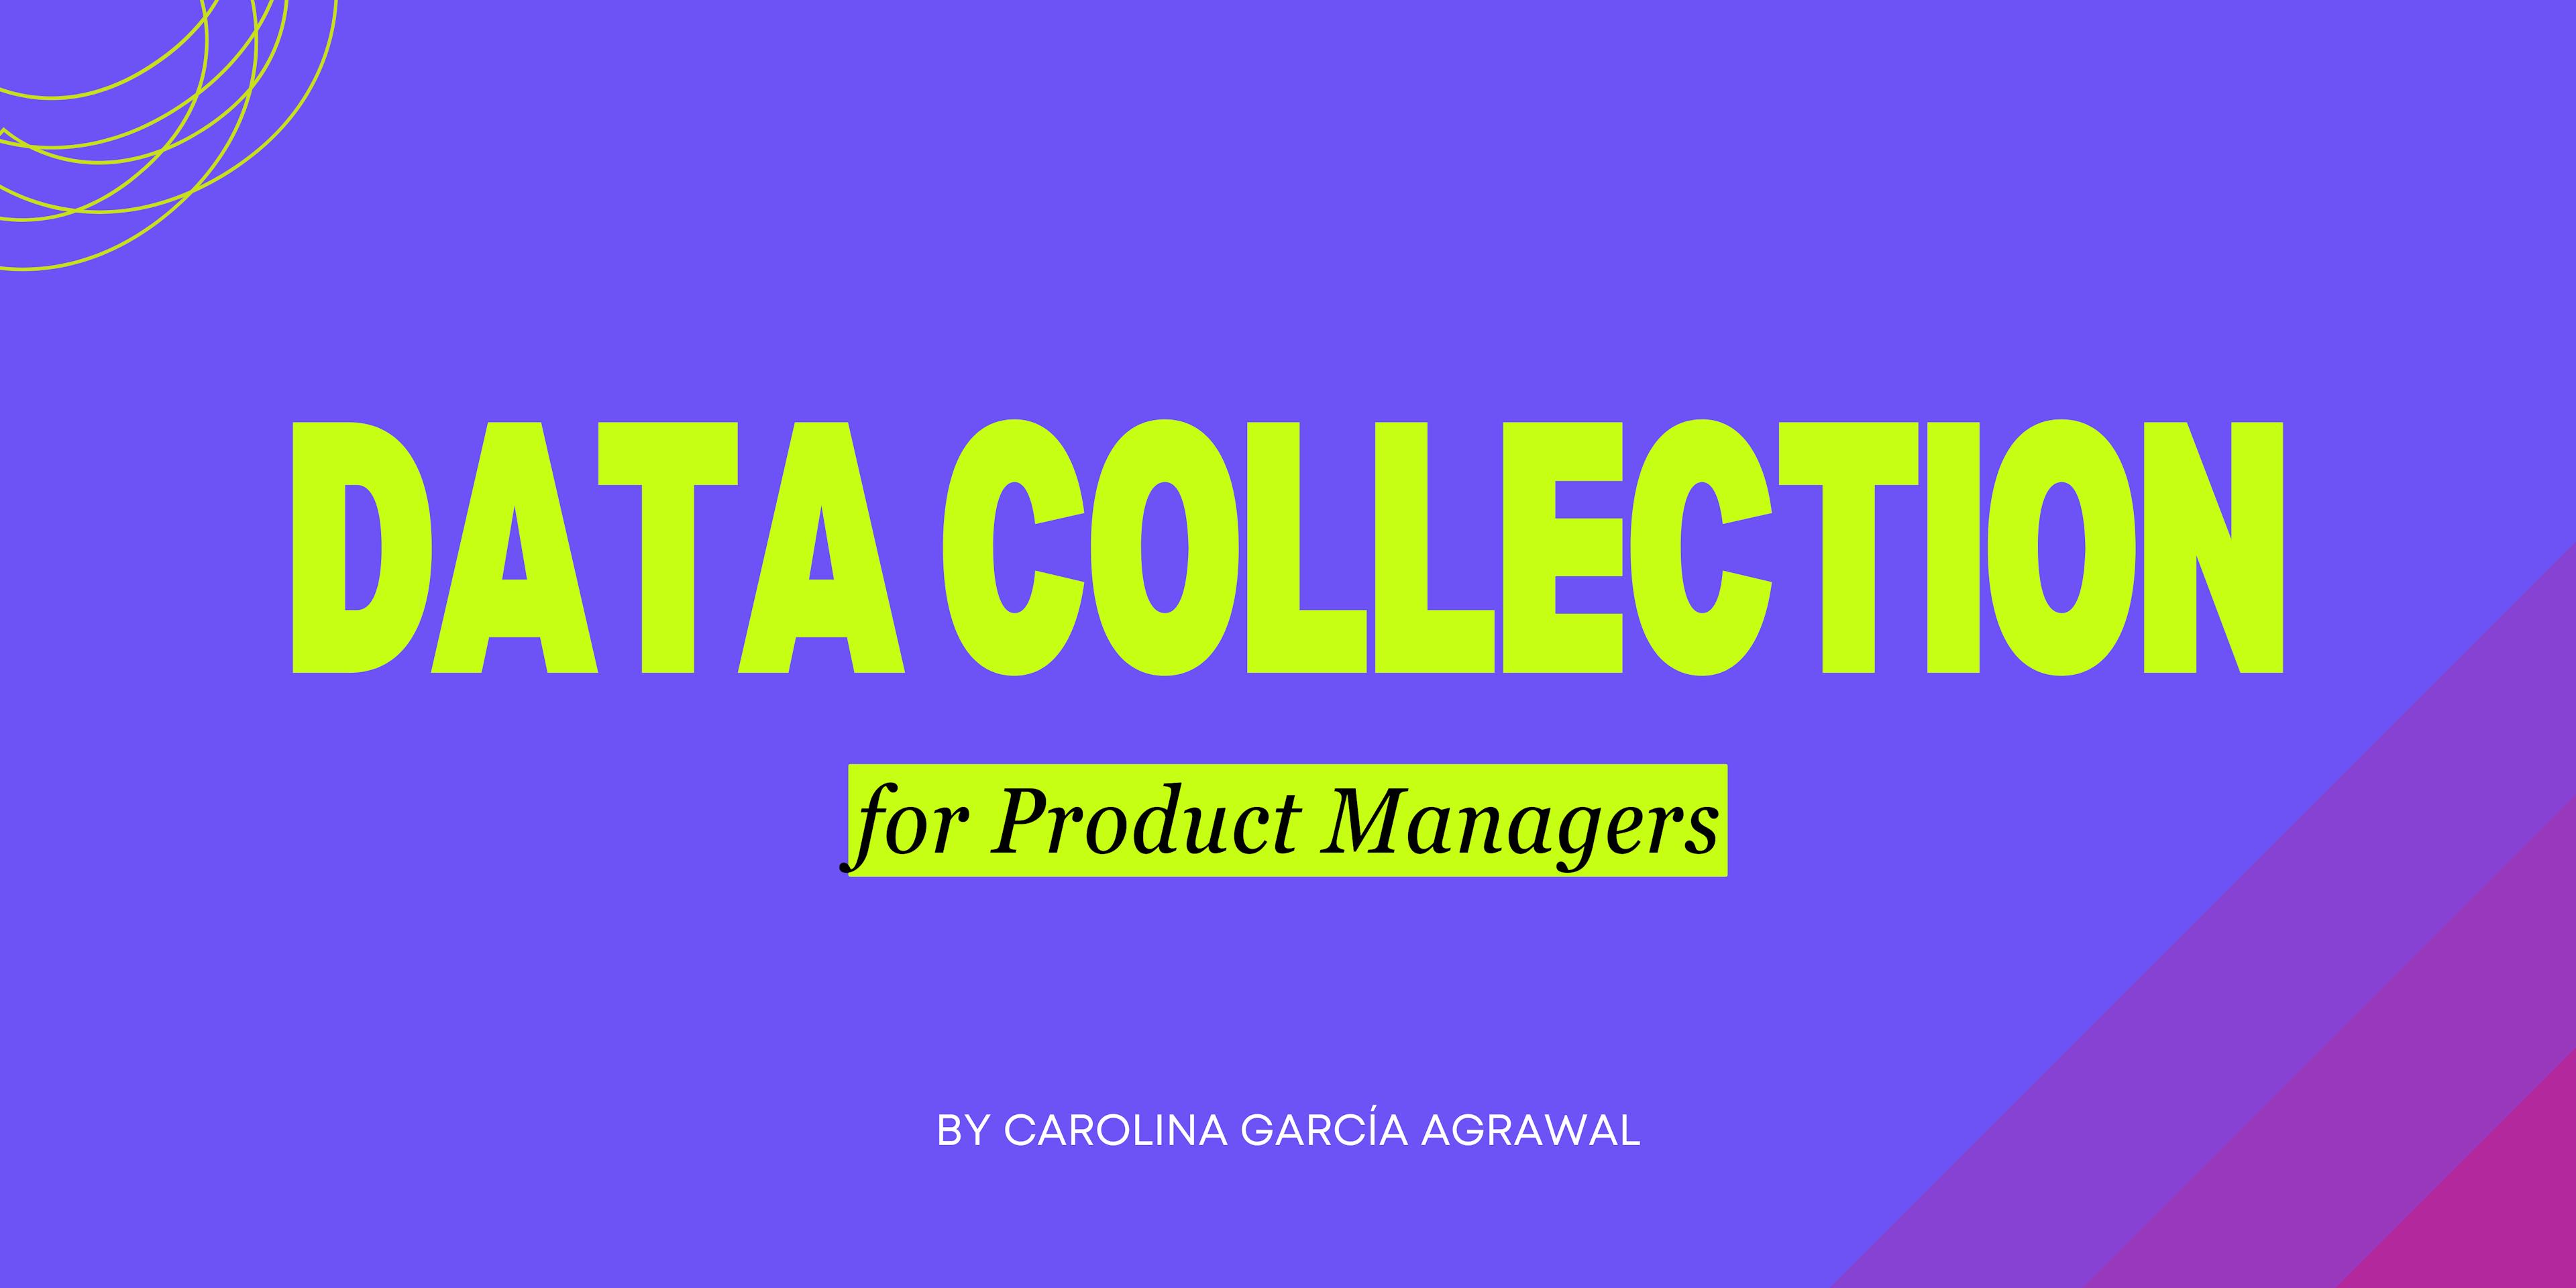 featured image - Data Collection for Product Managers